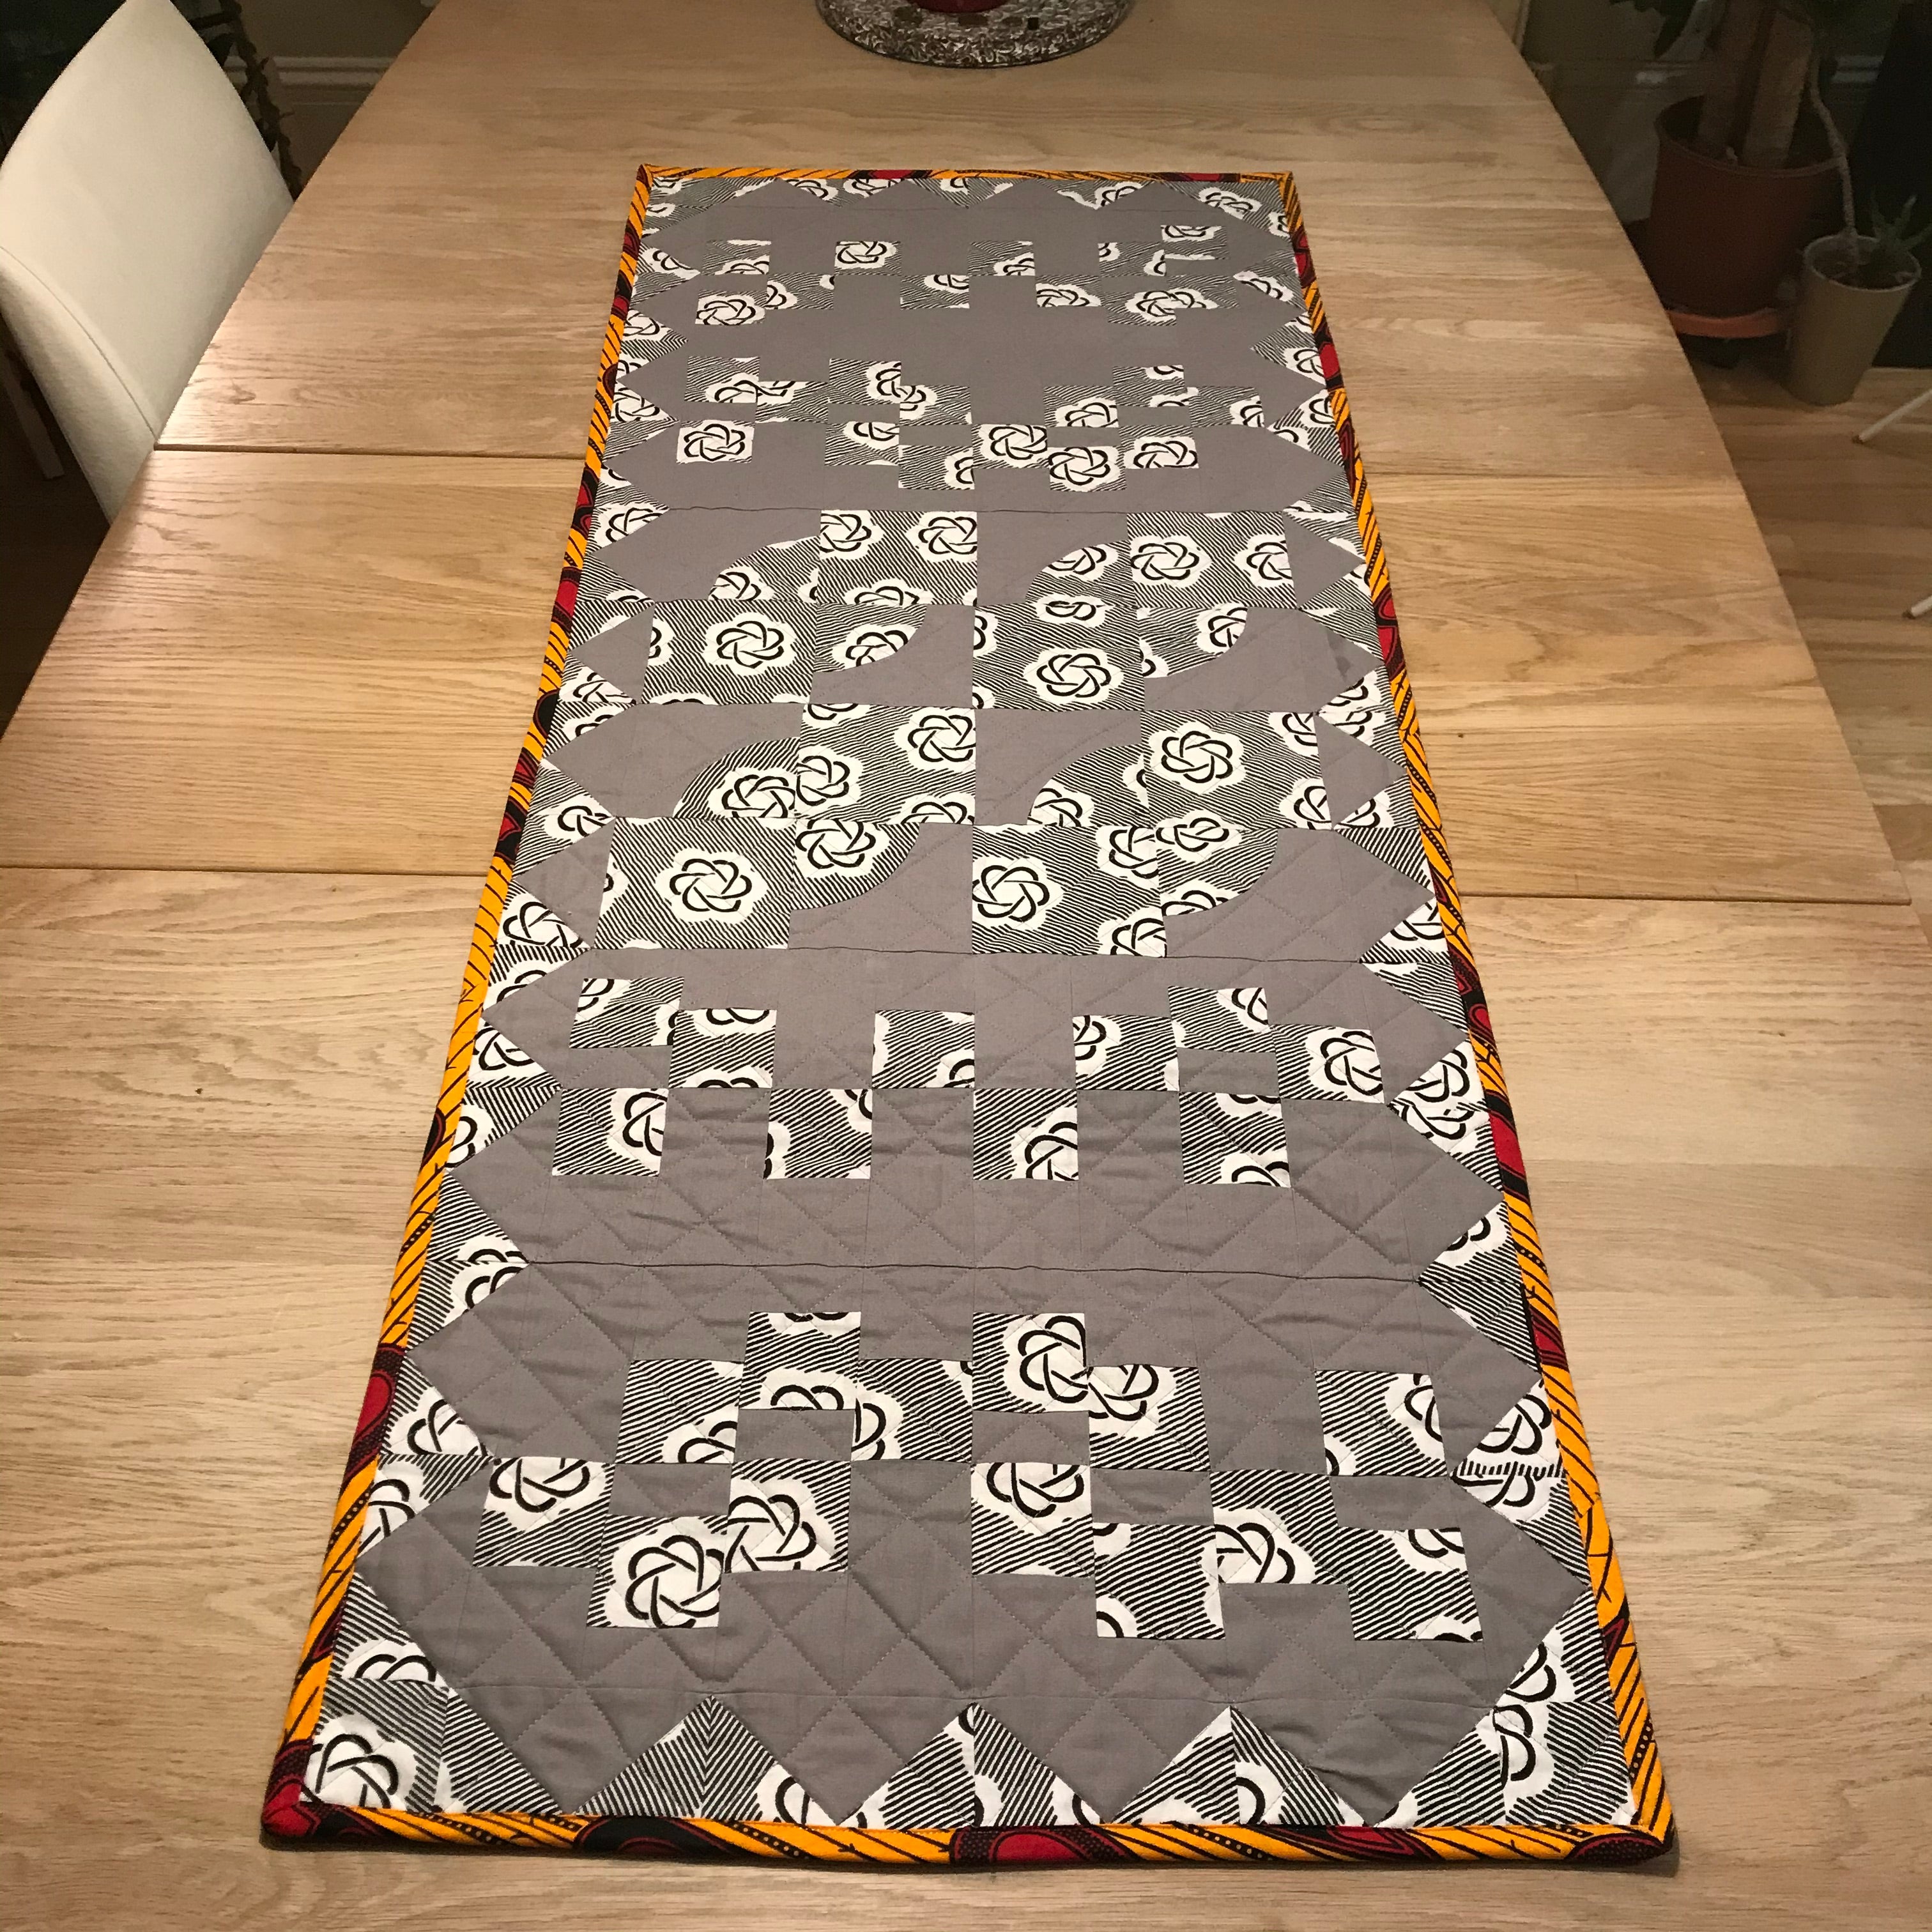 Black&White Quilted Table Runner